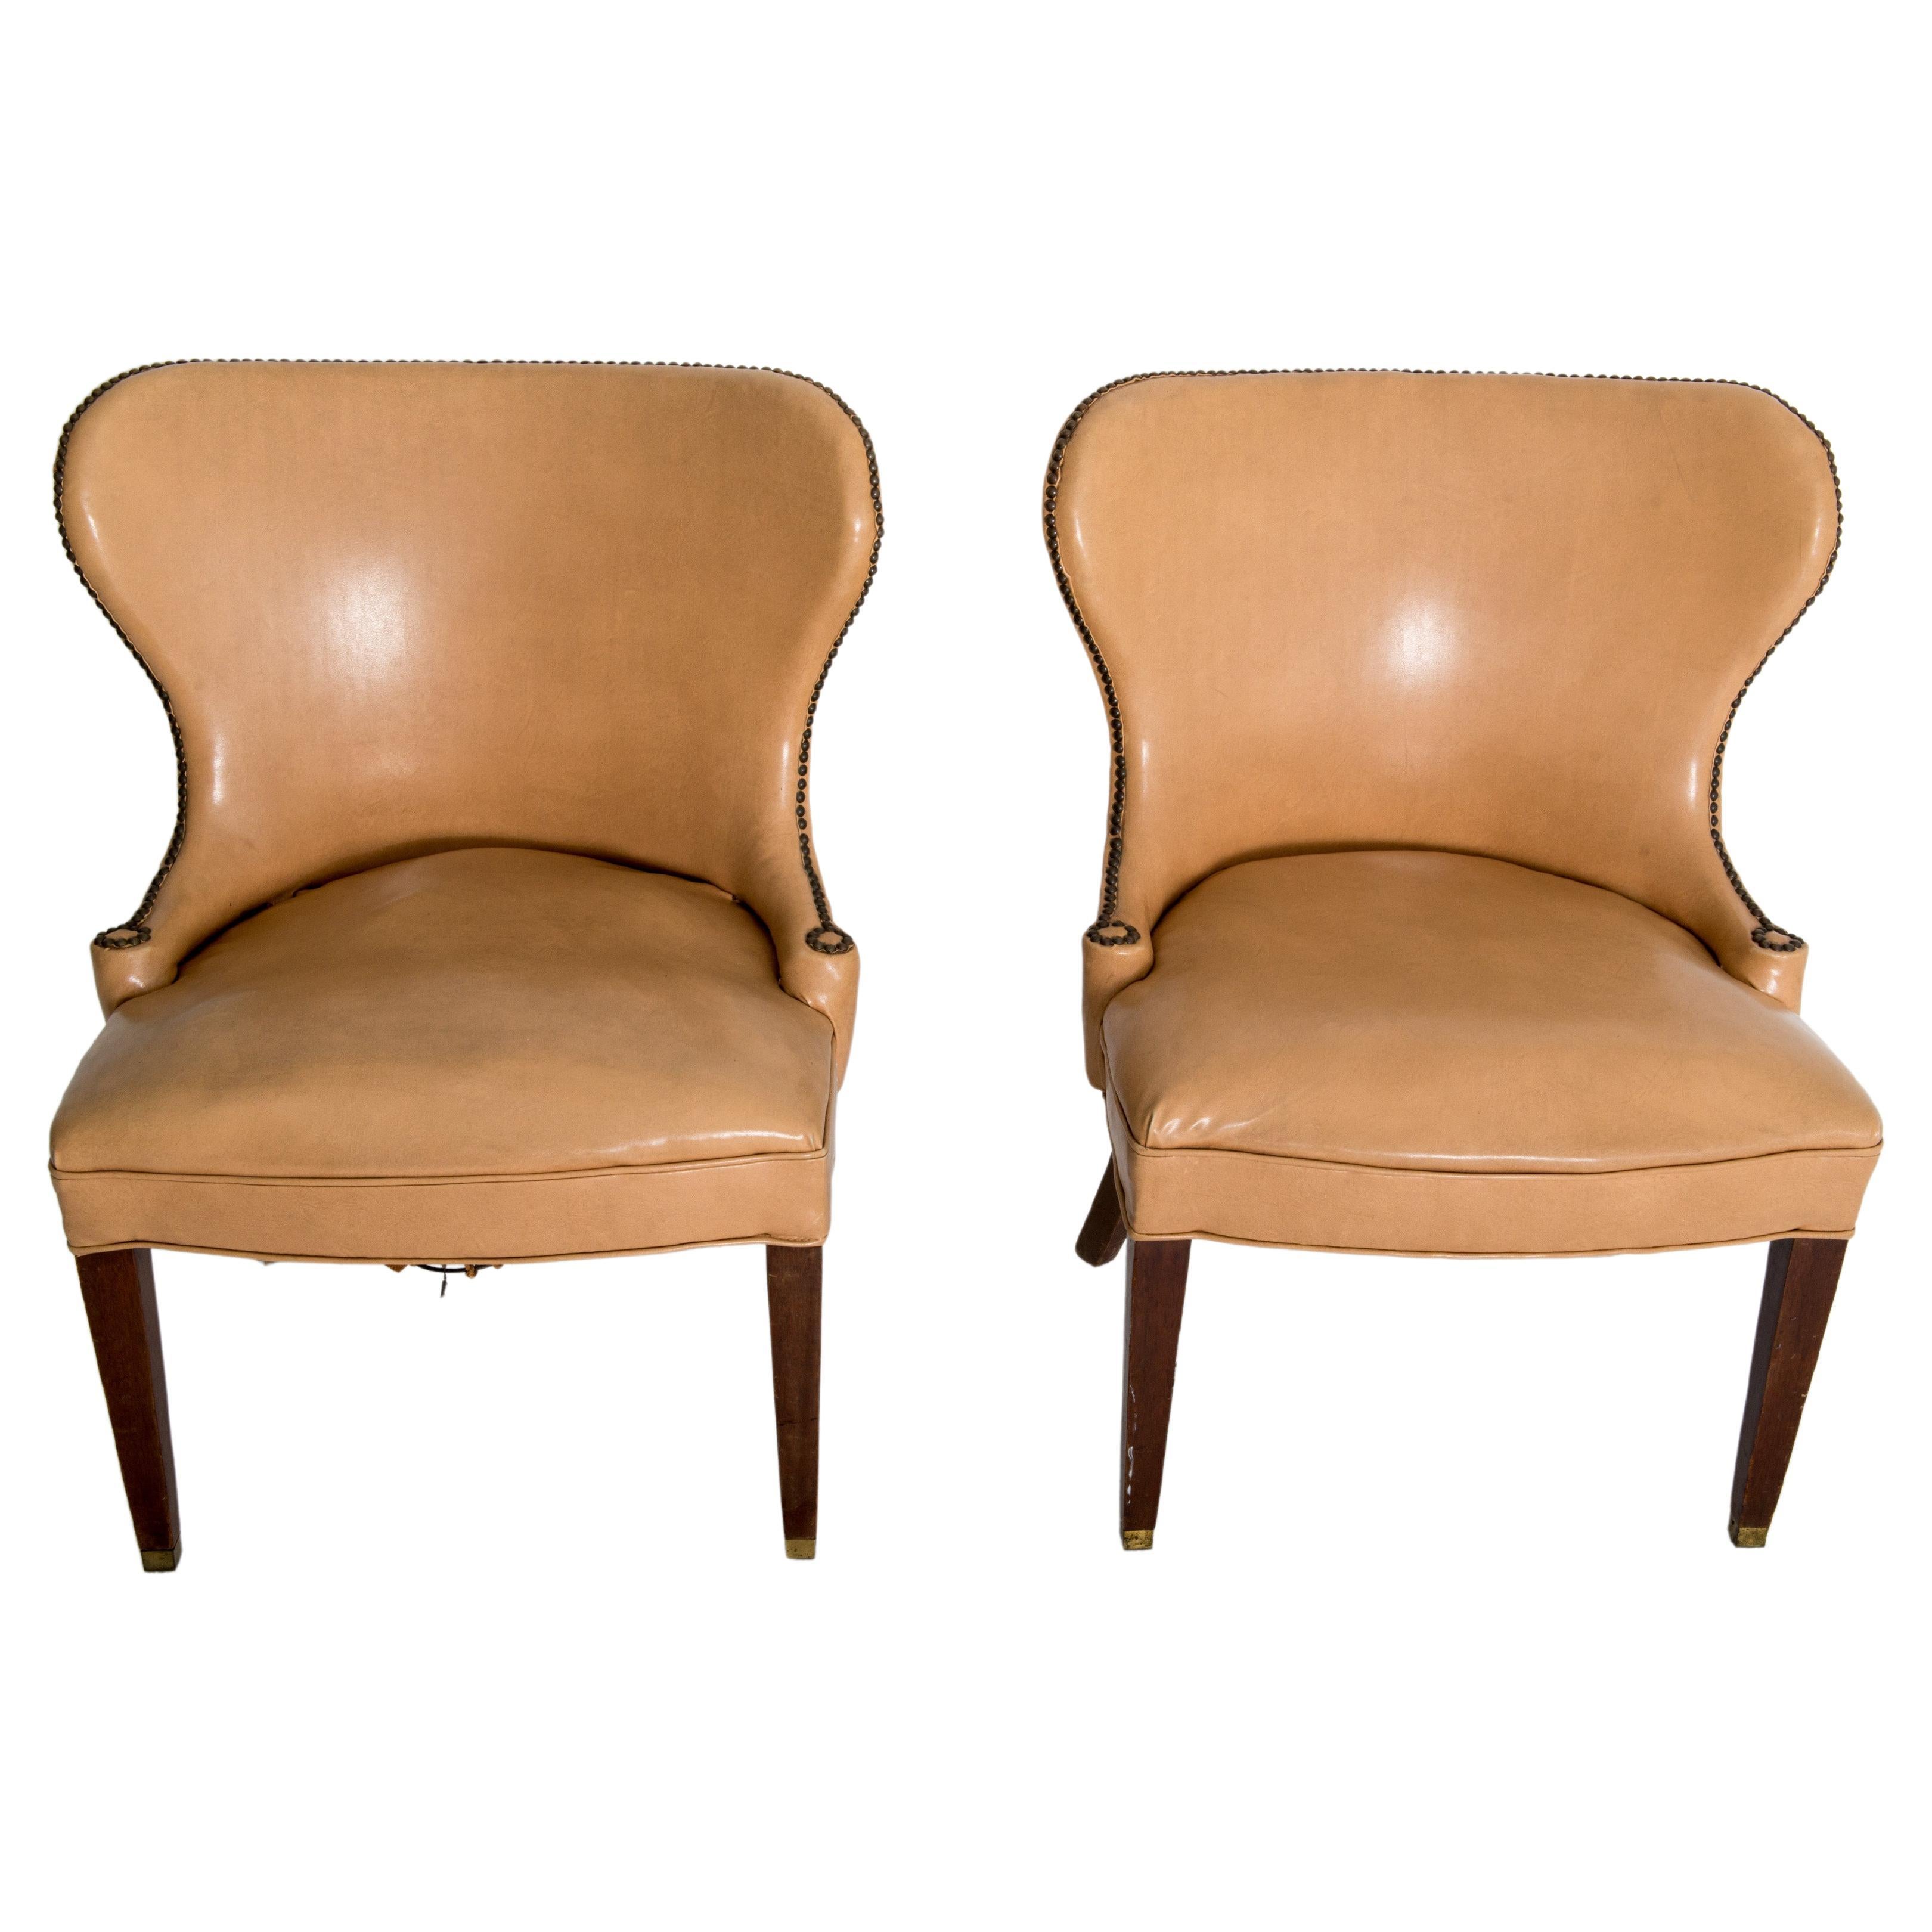 Pair of Grosfeld House Beige Faux Leather Club Chairs For Sale